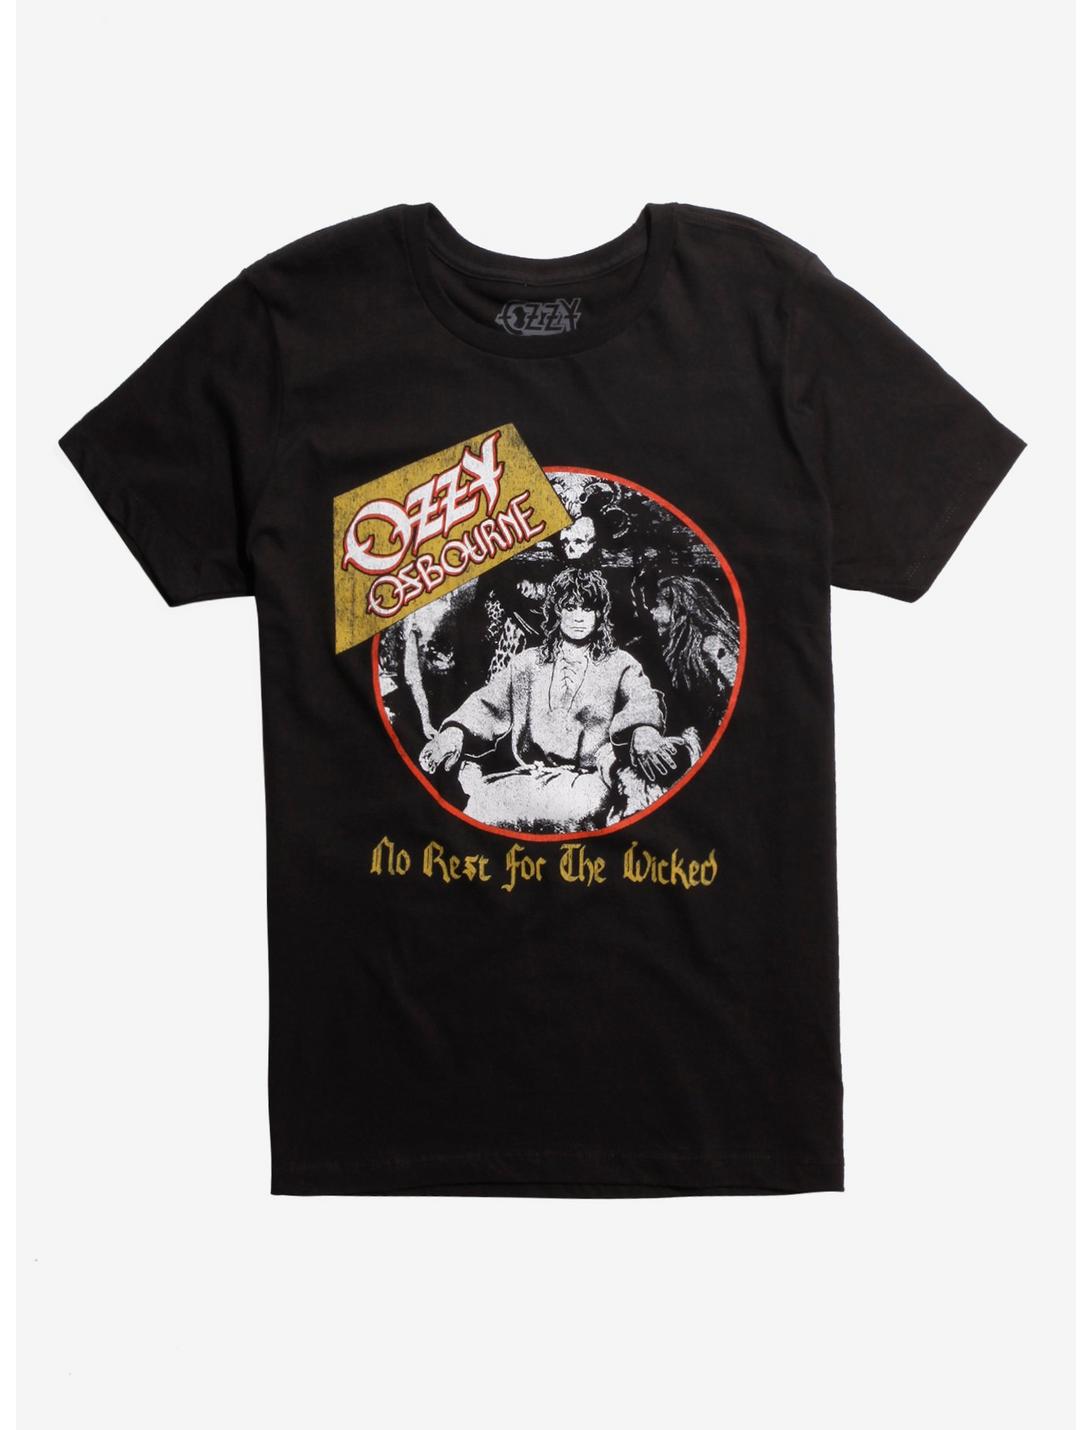 Ozzy Osbourne No Rest For The Wicked Tour T-Shirt, BLACK, hi-res